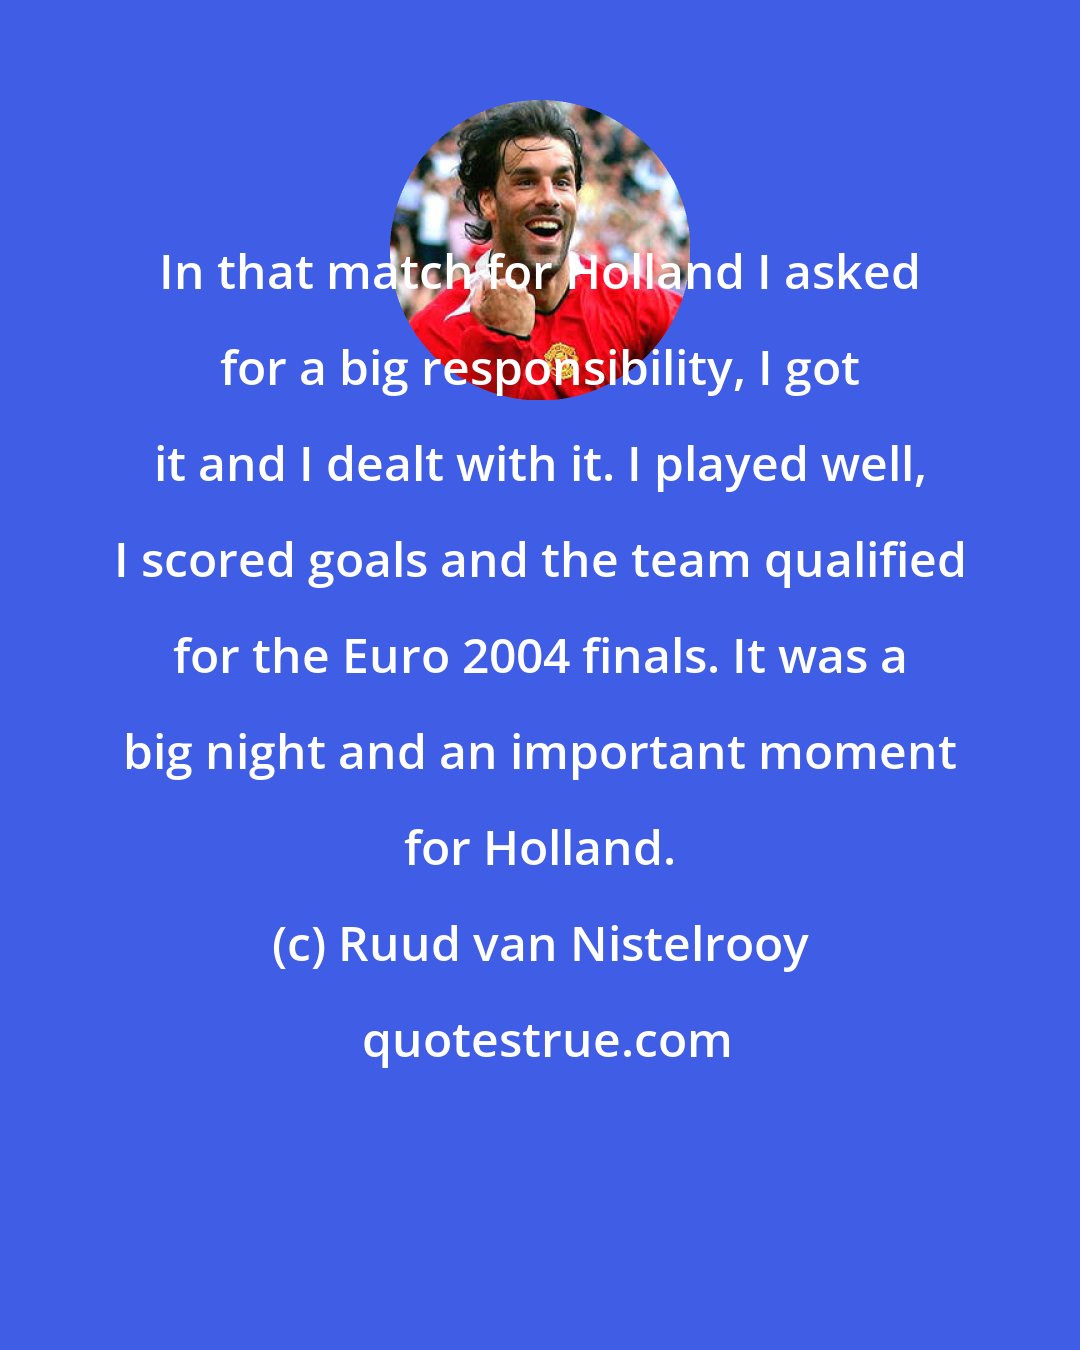 Ruud van Nistelrooy: In that match for Holland I asked for a big responsibility, I got it and I dealt with it. I played well, I scored goals and the team qualified for the Euro 2004 finals. It was a big night and an important moment for Holland.